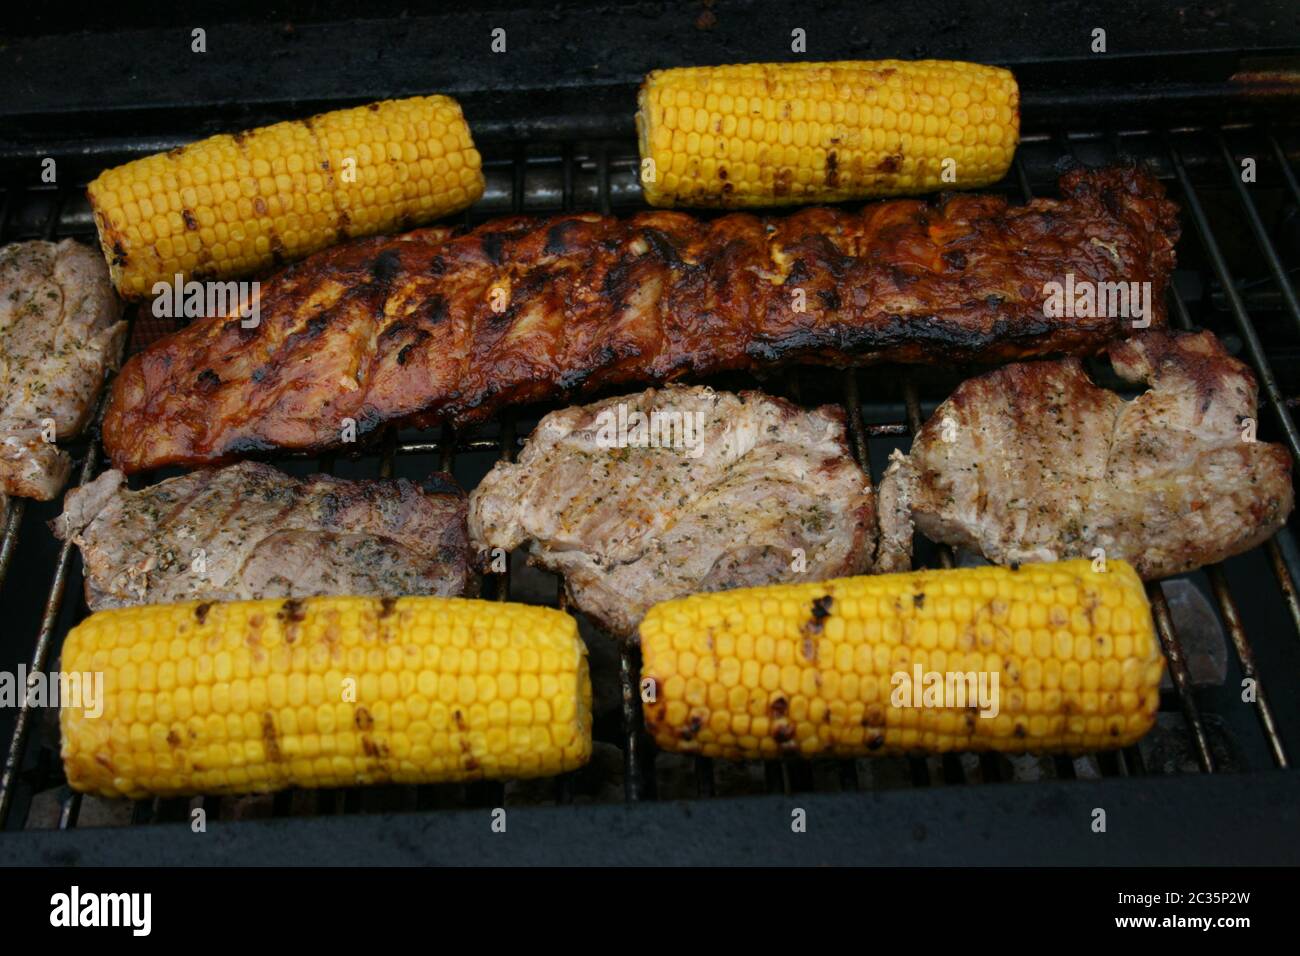 Several pieces of grilled meat and corn on the cob on a grill Stock Photo